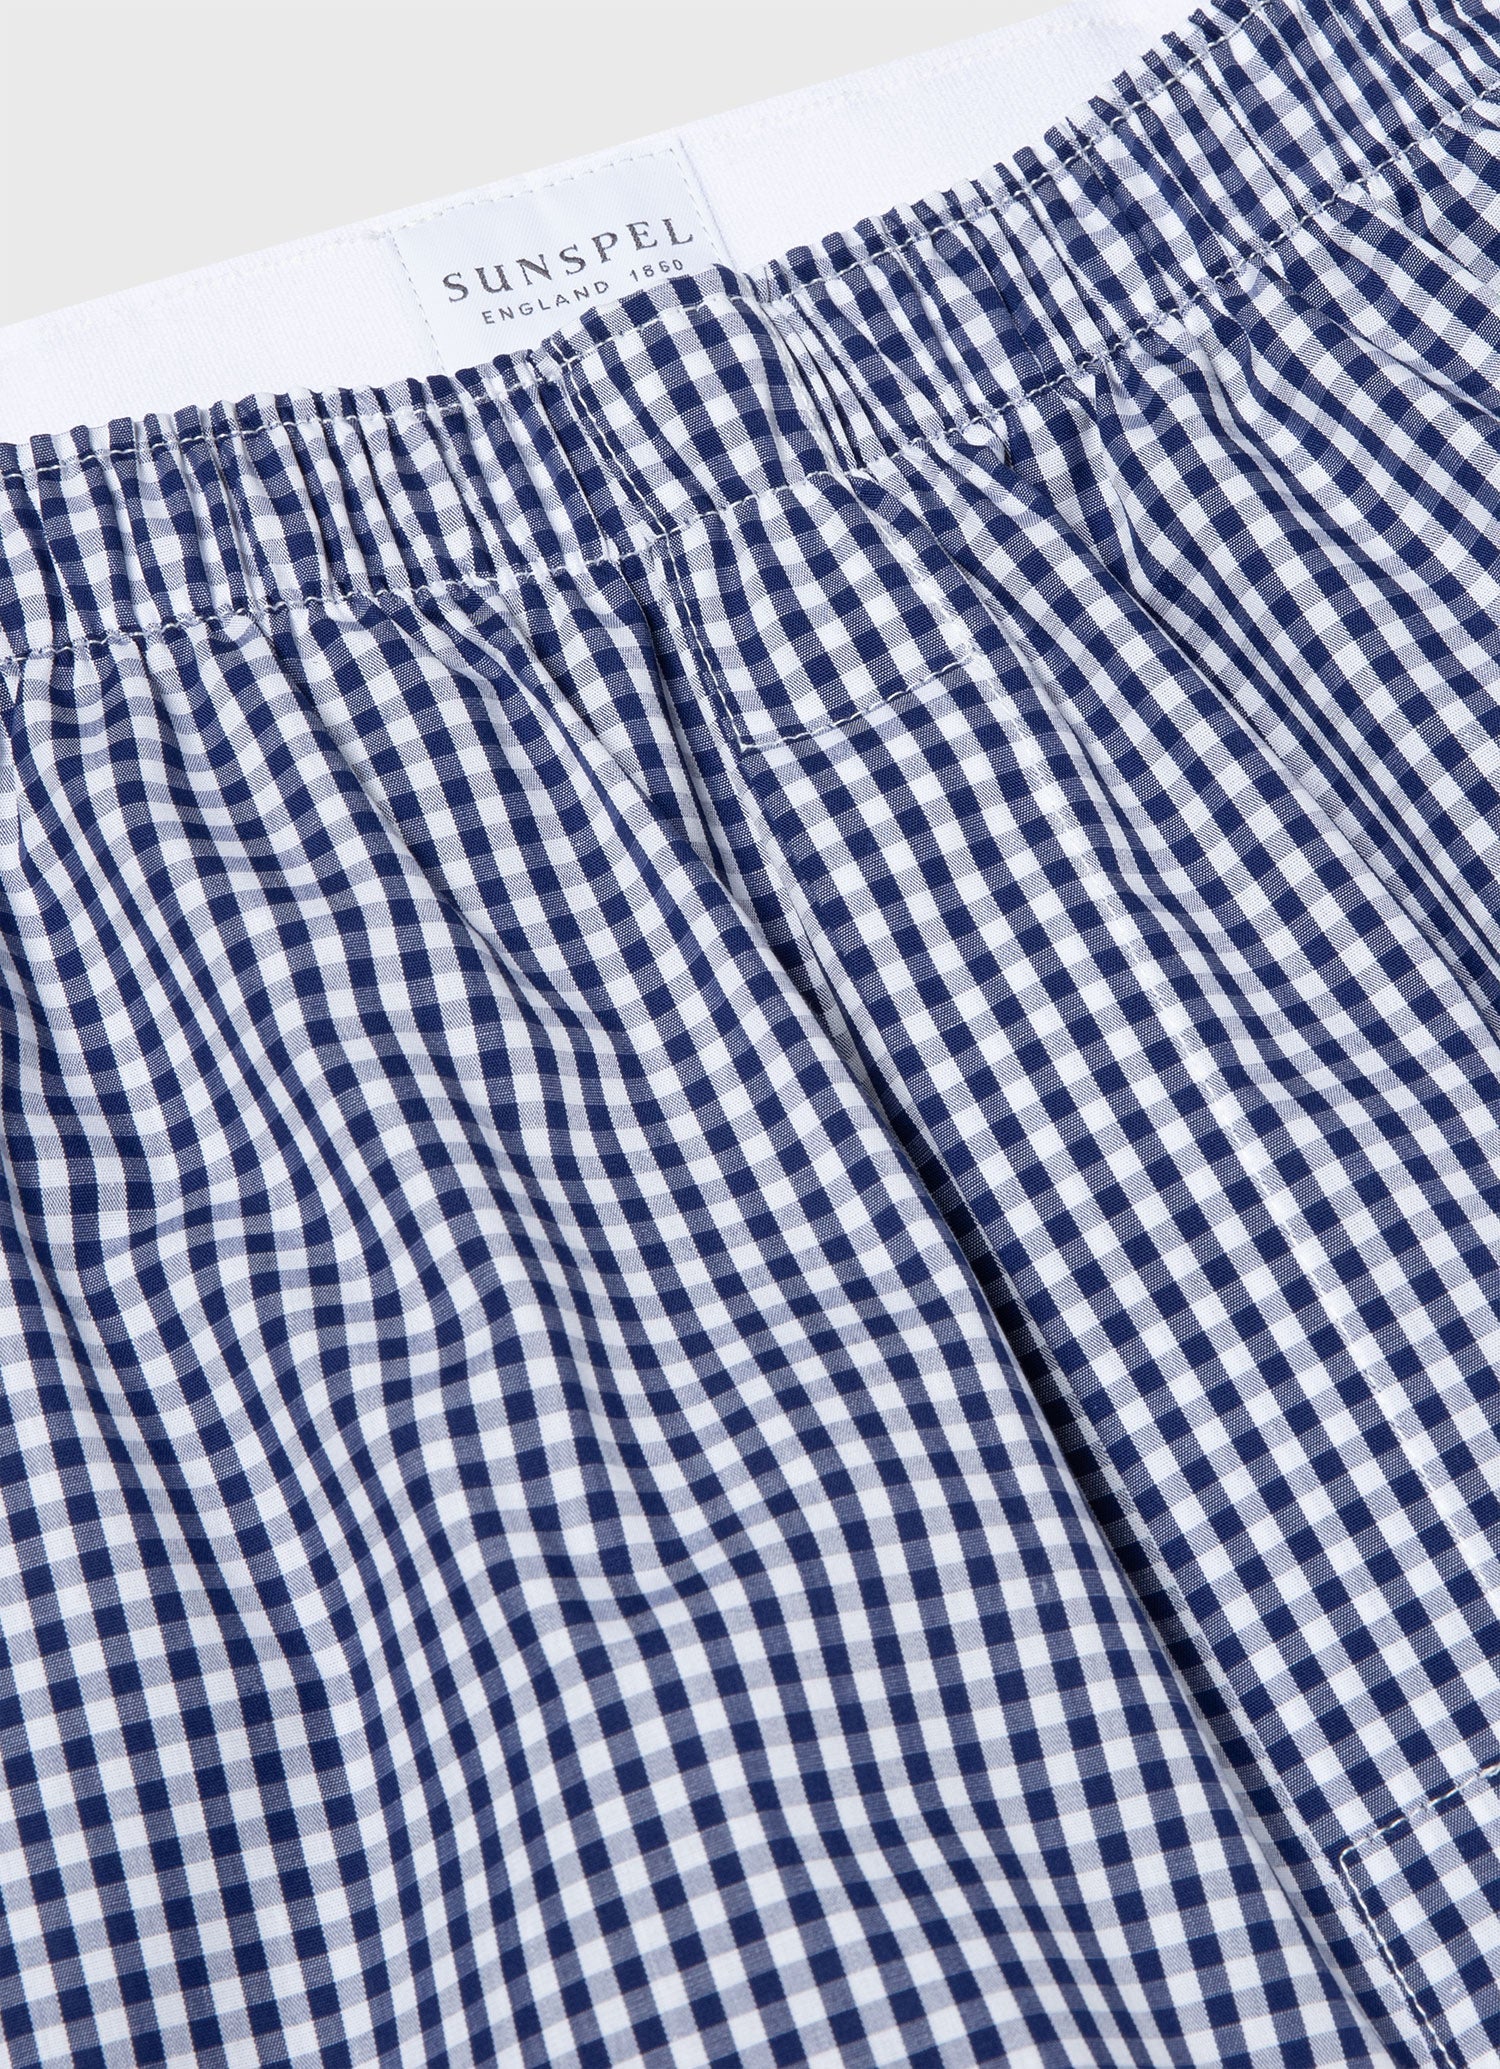 Men's Classic Boxer Shorts in Navy Gingham